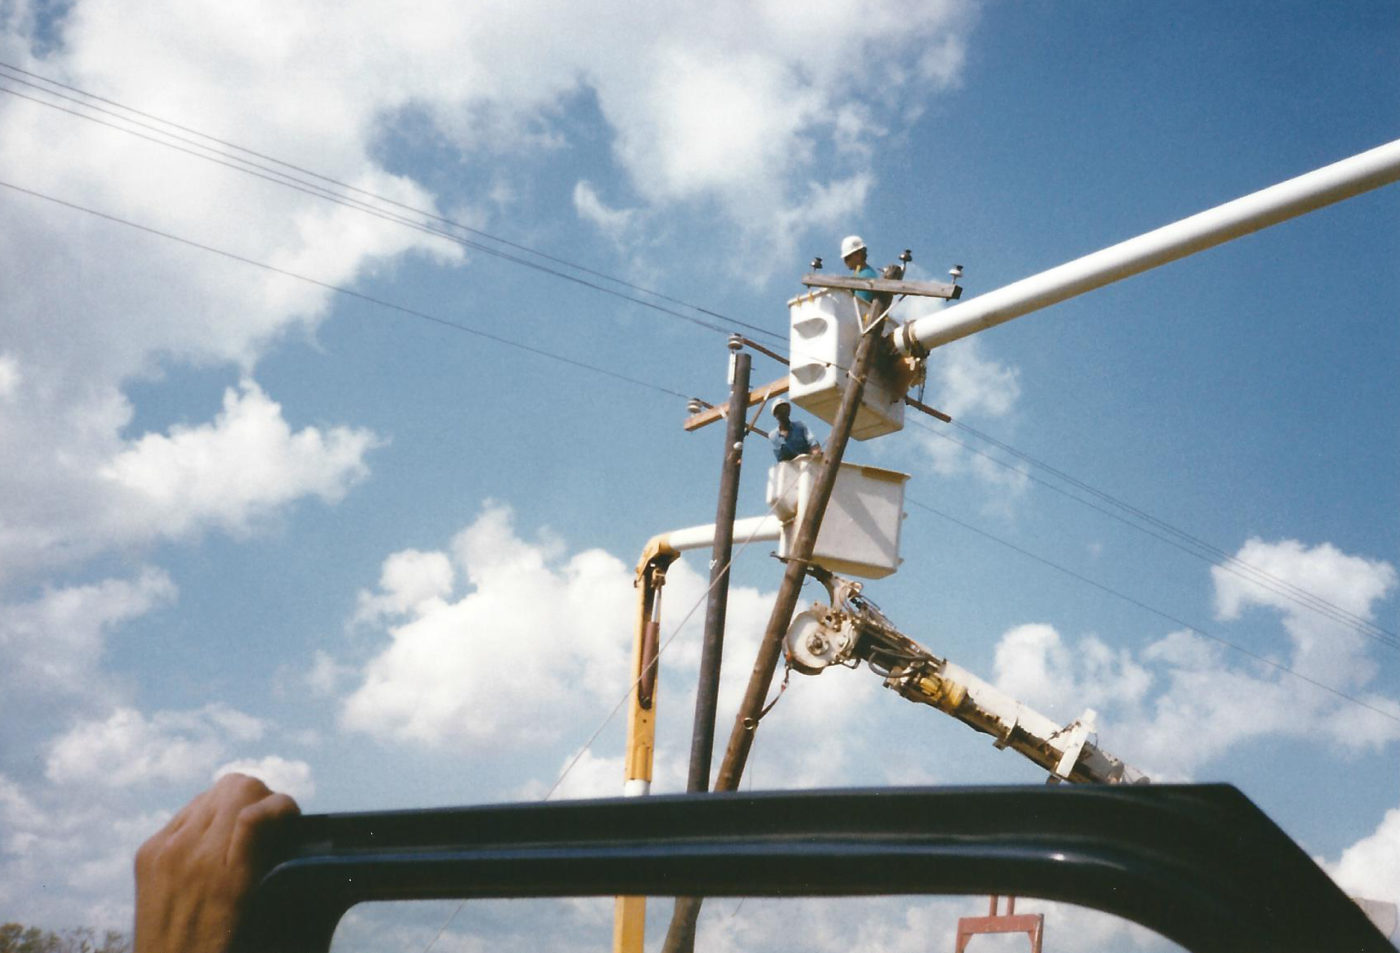 Electrician on a lift truck working on power poles.